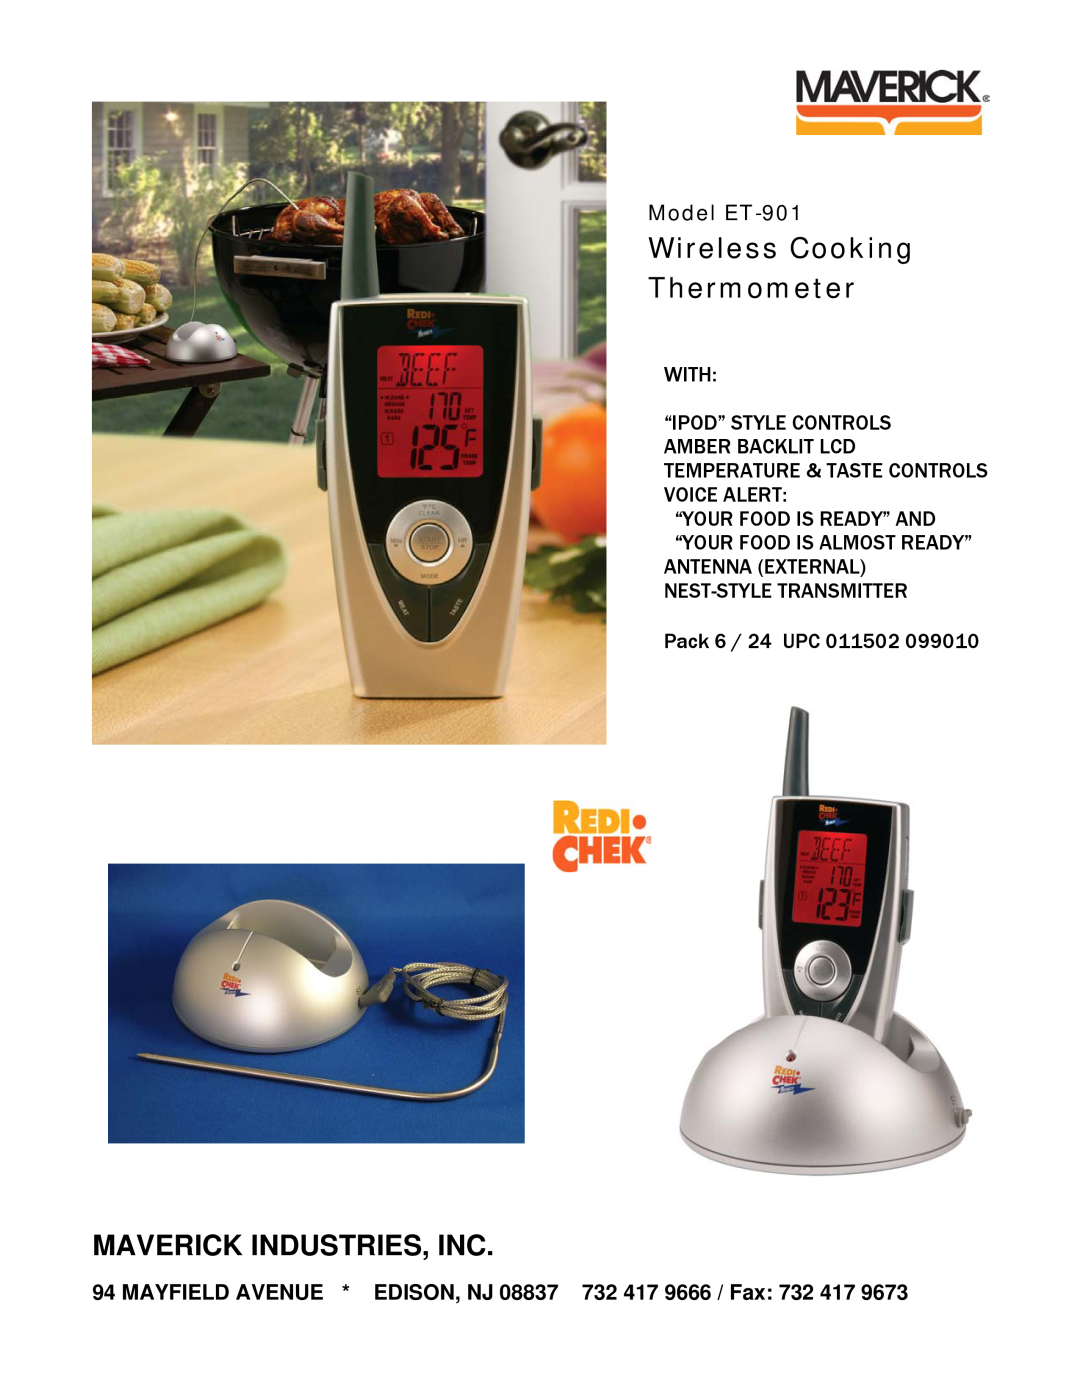 Maverick Ventures manual Wireless Cooking Thermometer, Maverick Industries, Inc, Model ET-901, With 